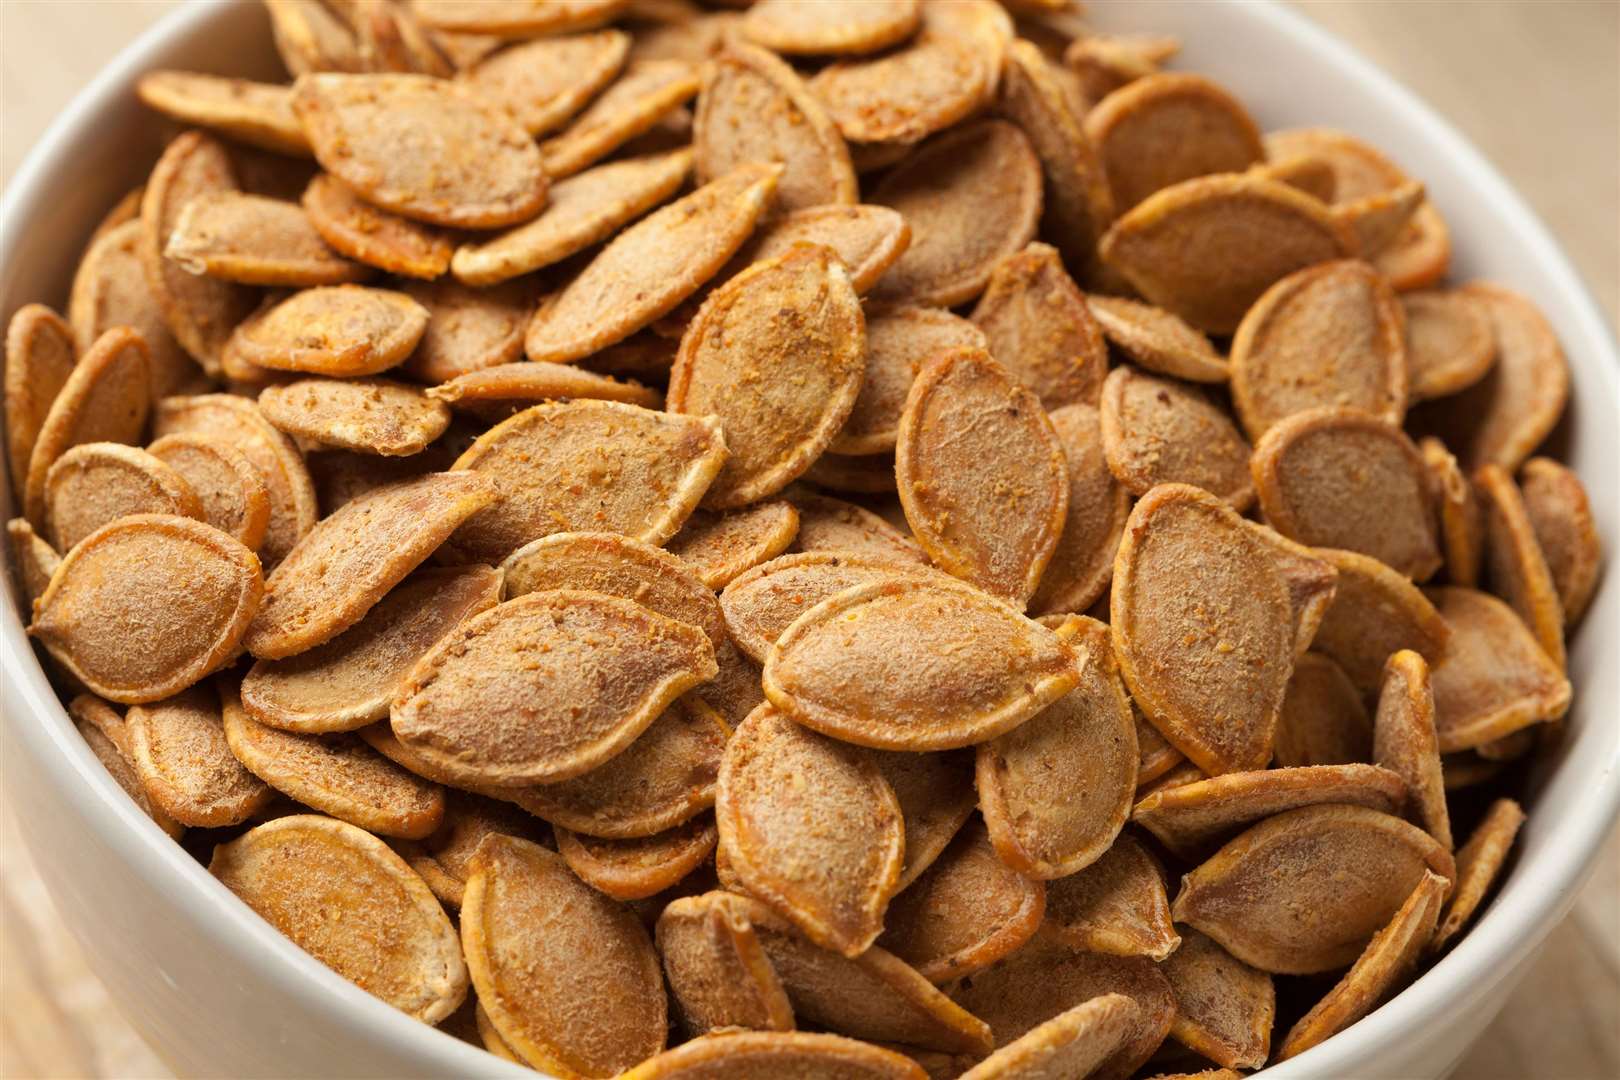 Pumpkin seeds can be roasted